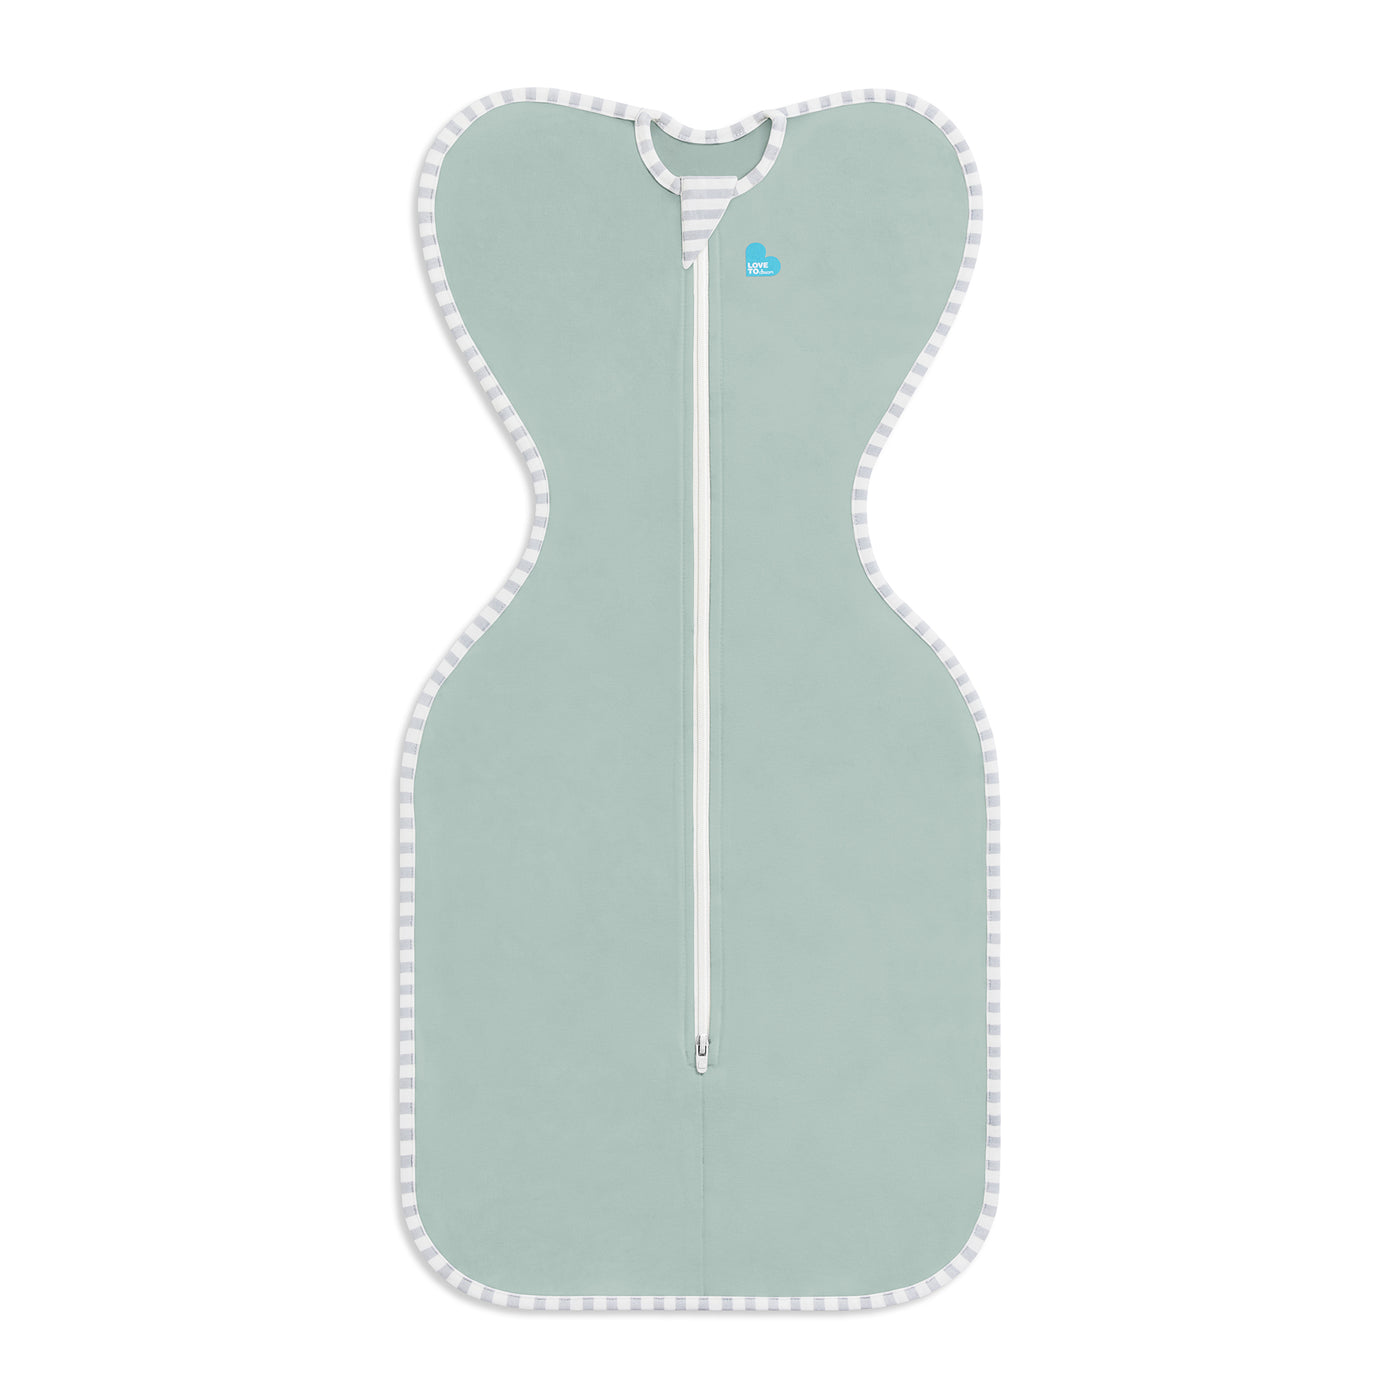 Swaddle Up™ Lite 0.2 TOG - Olive - Love to Dream™ NZ 